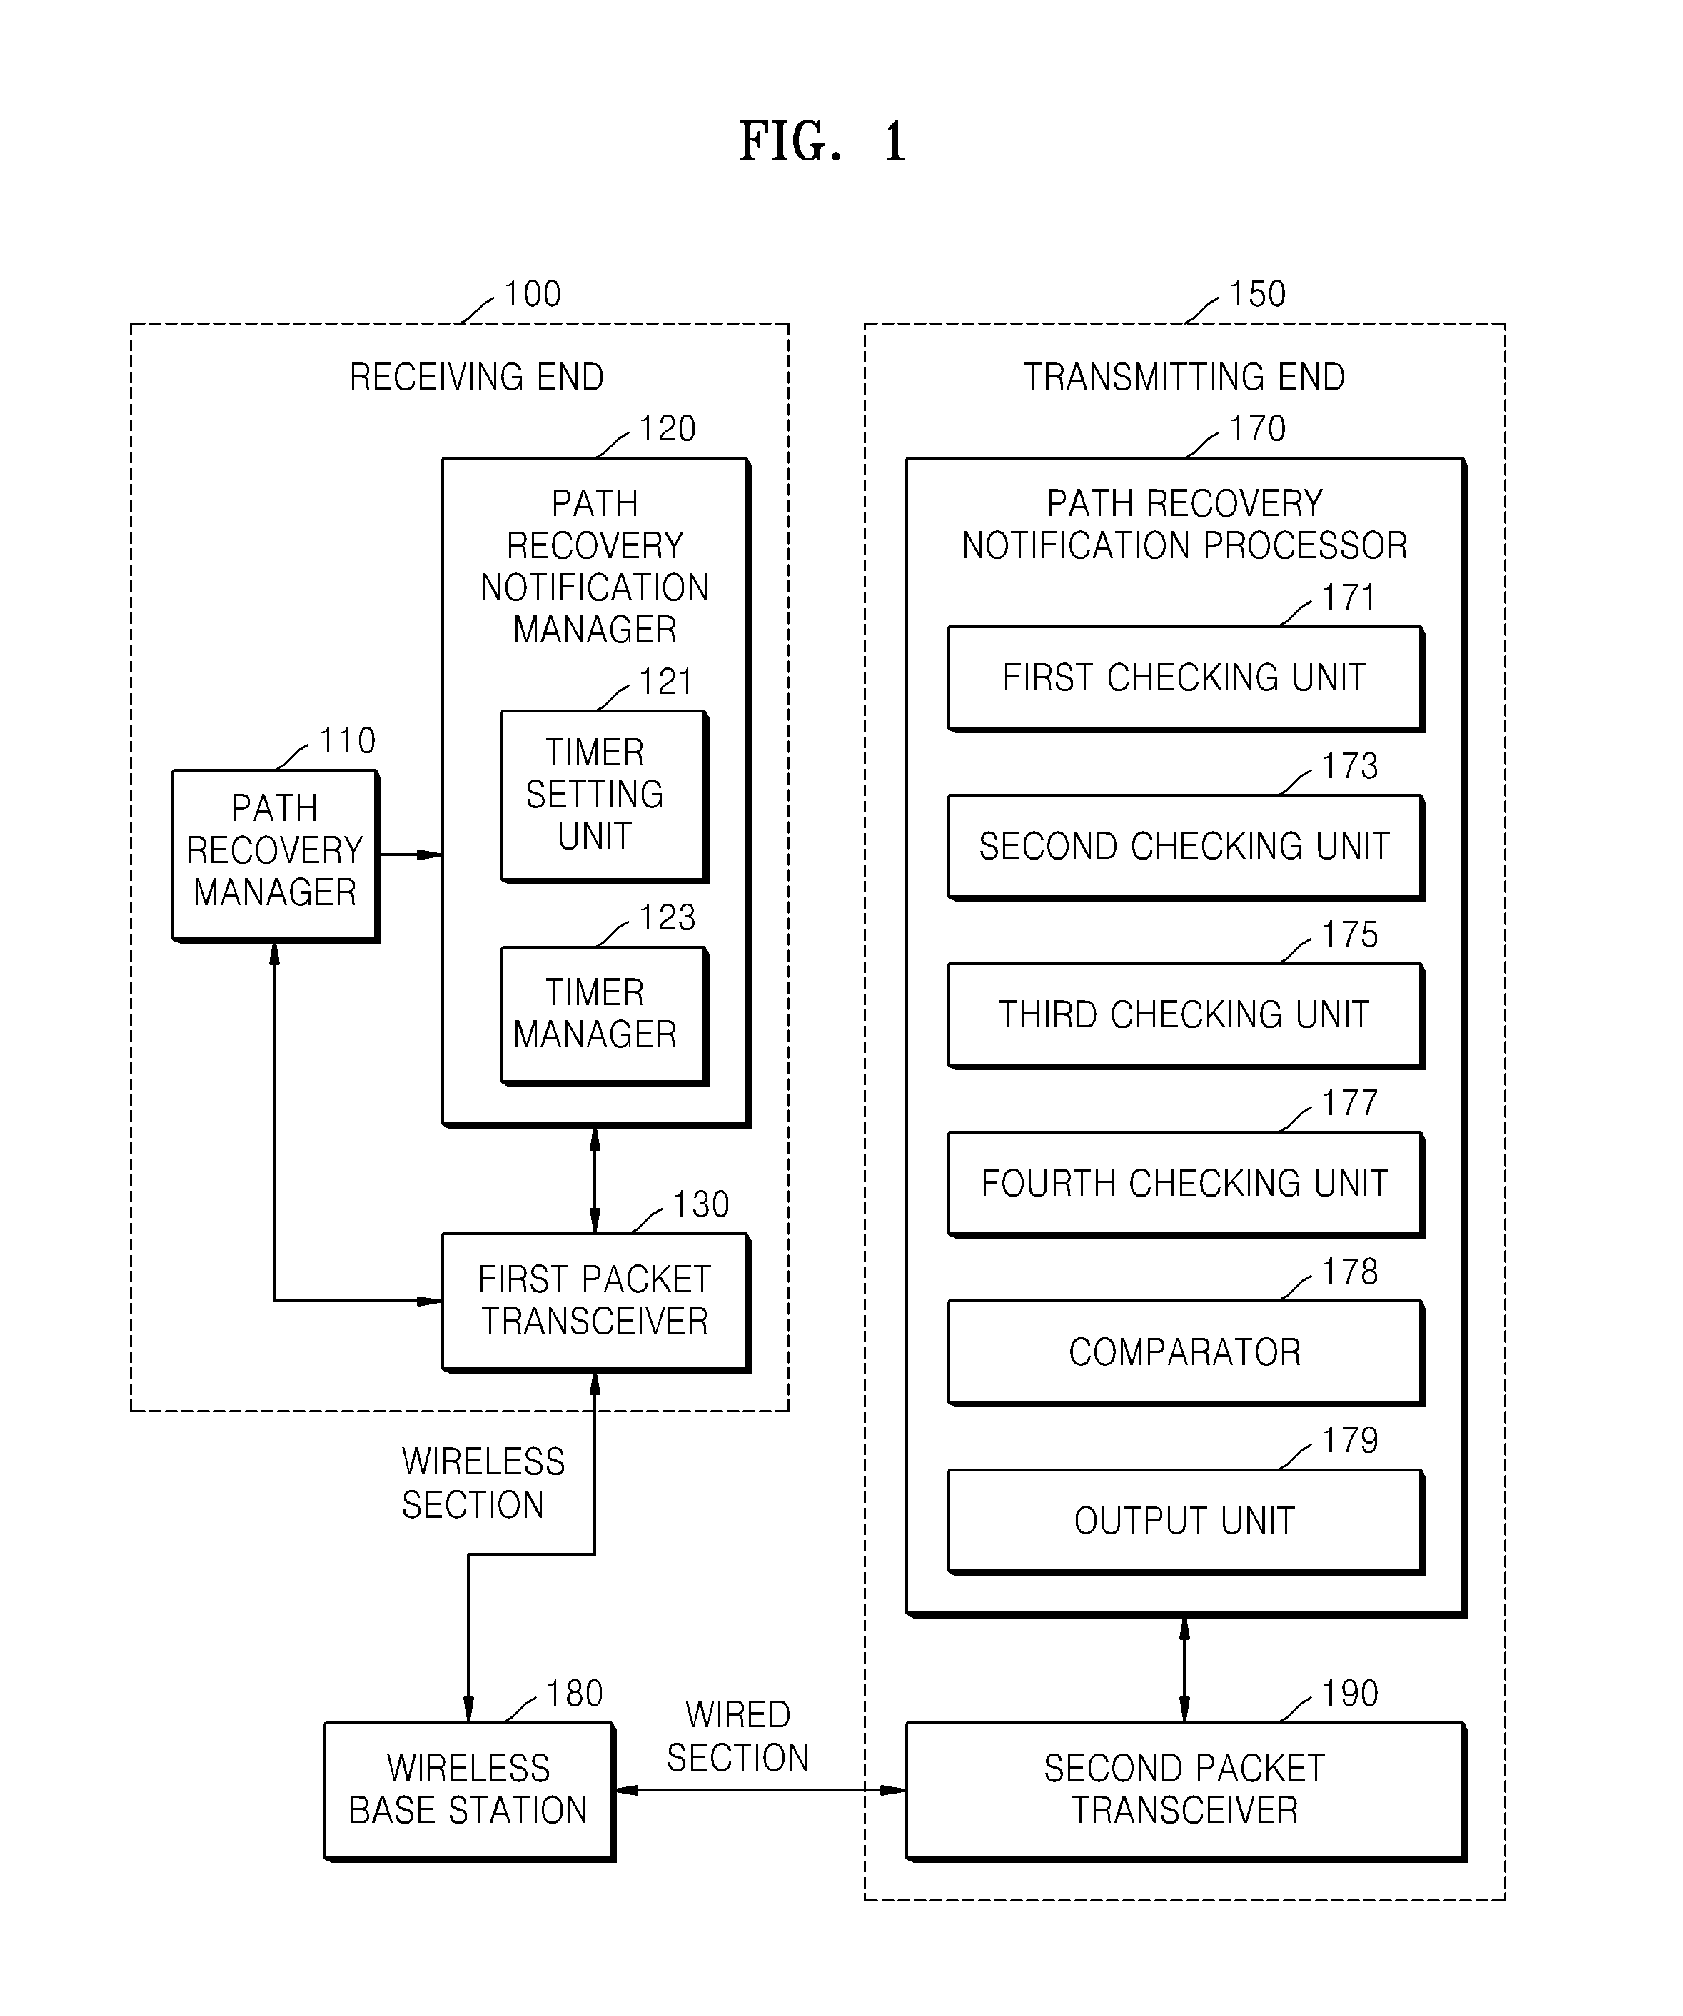 Apparatus and method for improving transport control protocol performance using path recovery notification over wireless network